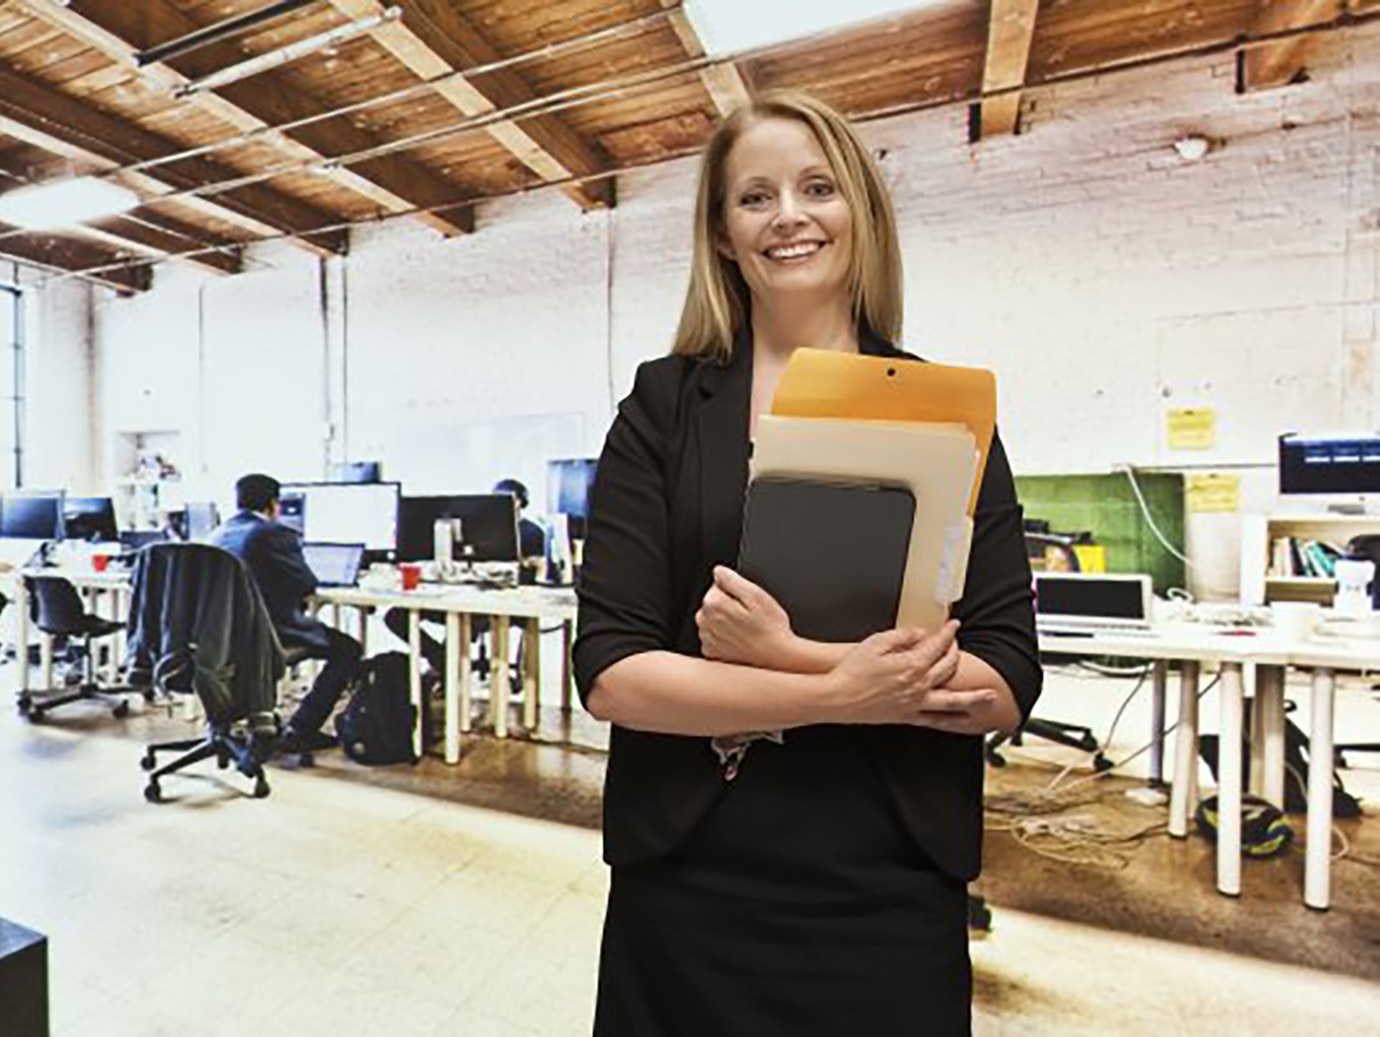 Woman standing in an office room with a set of files in her hand